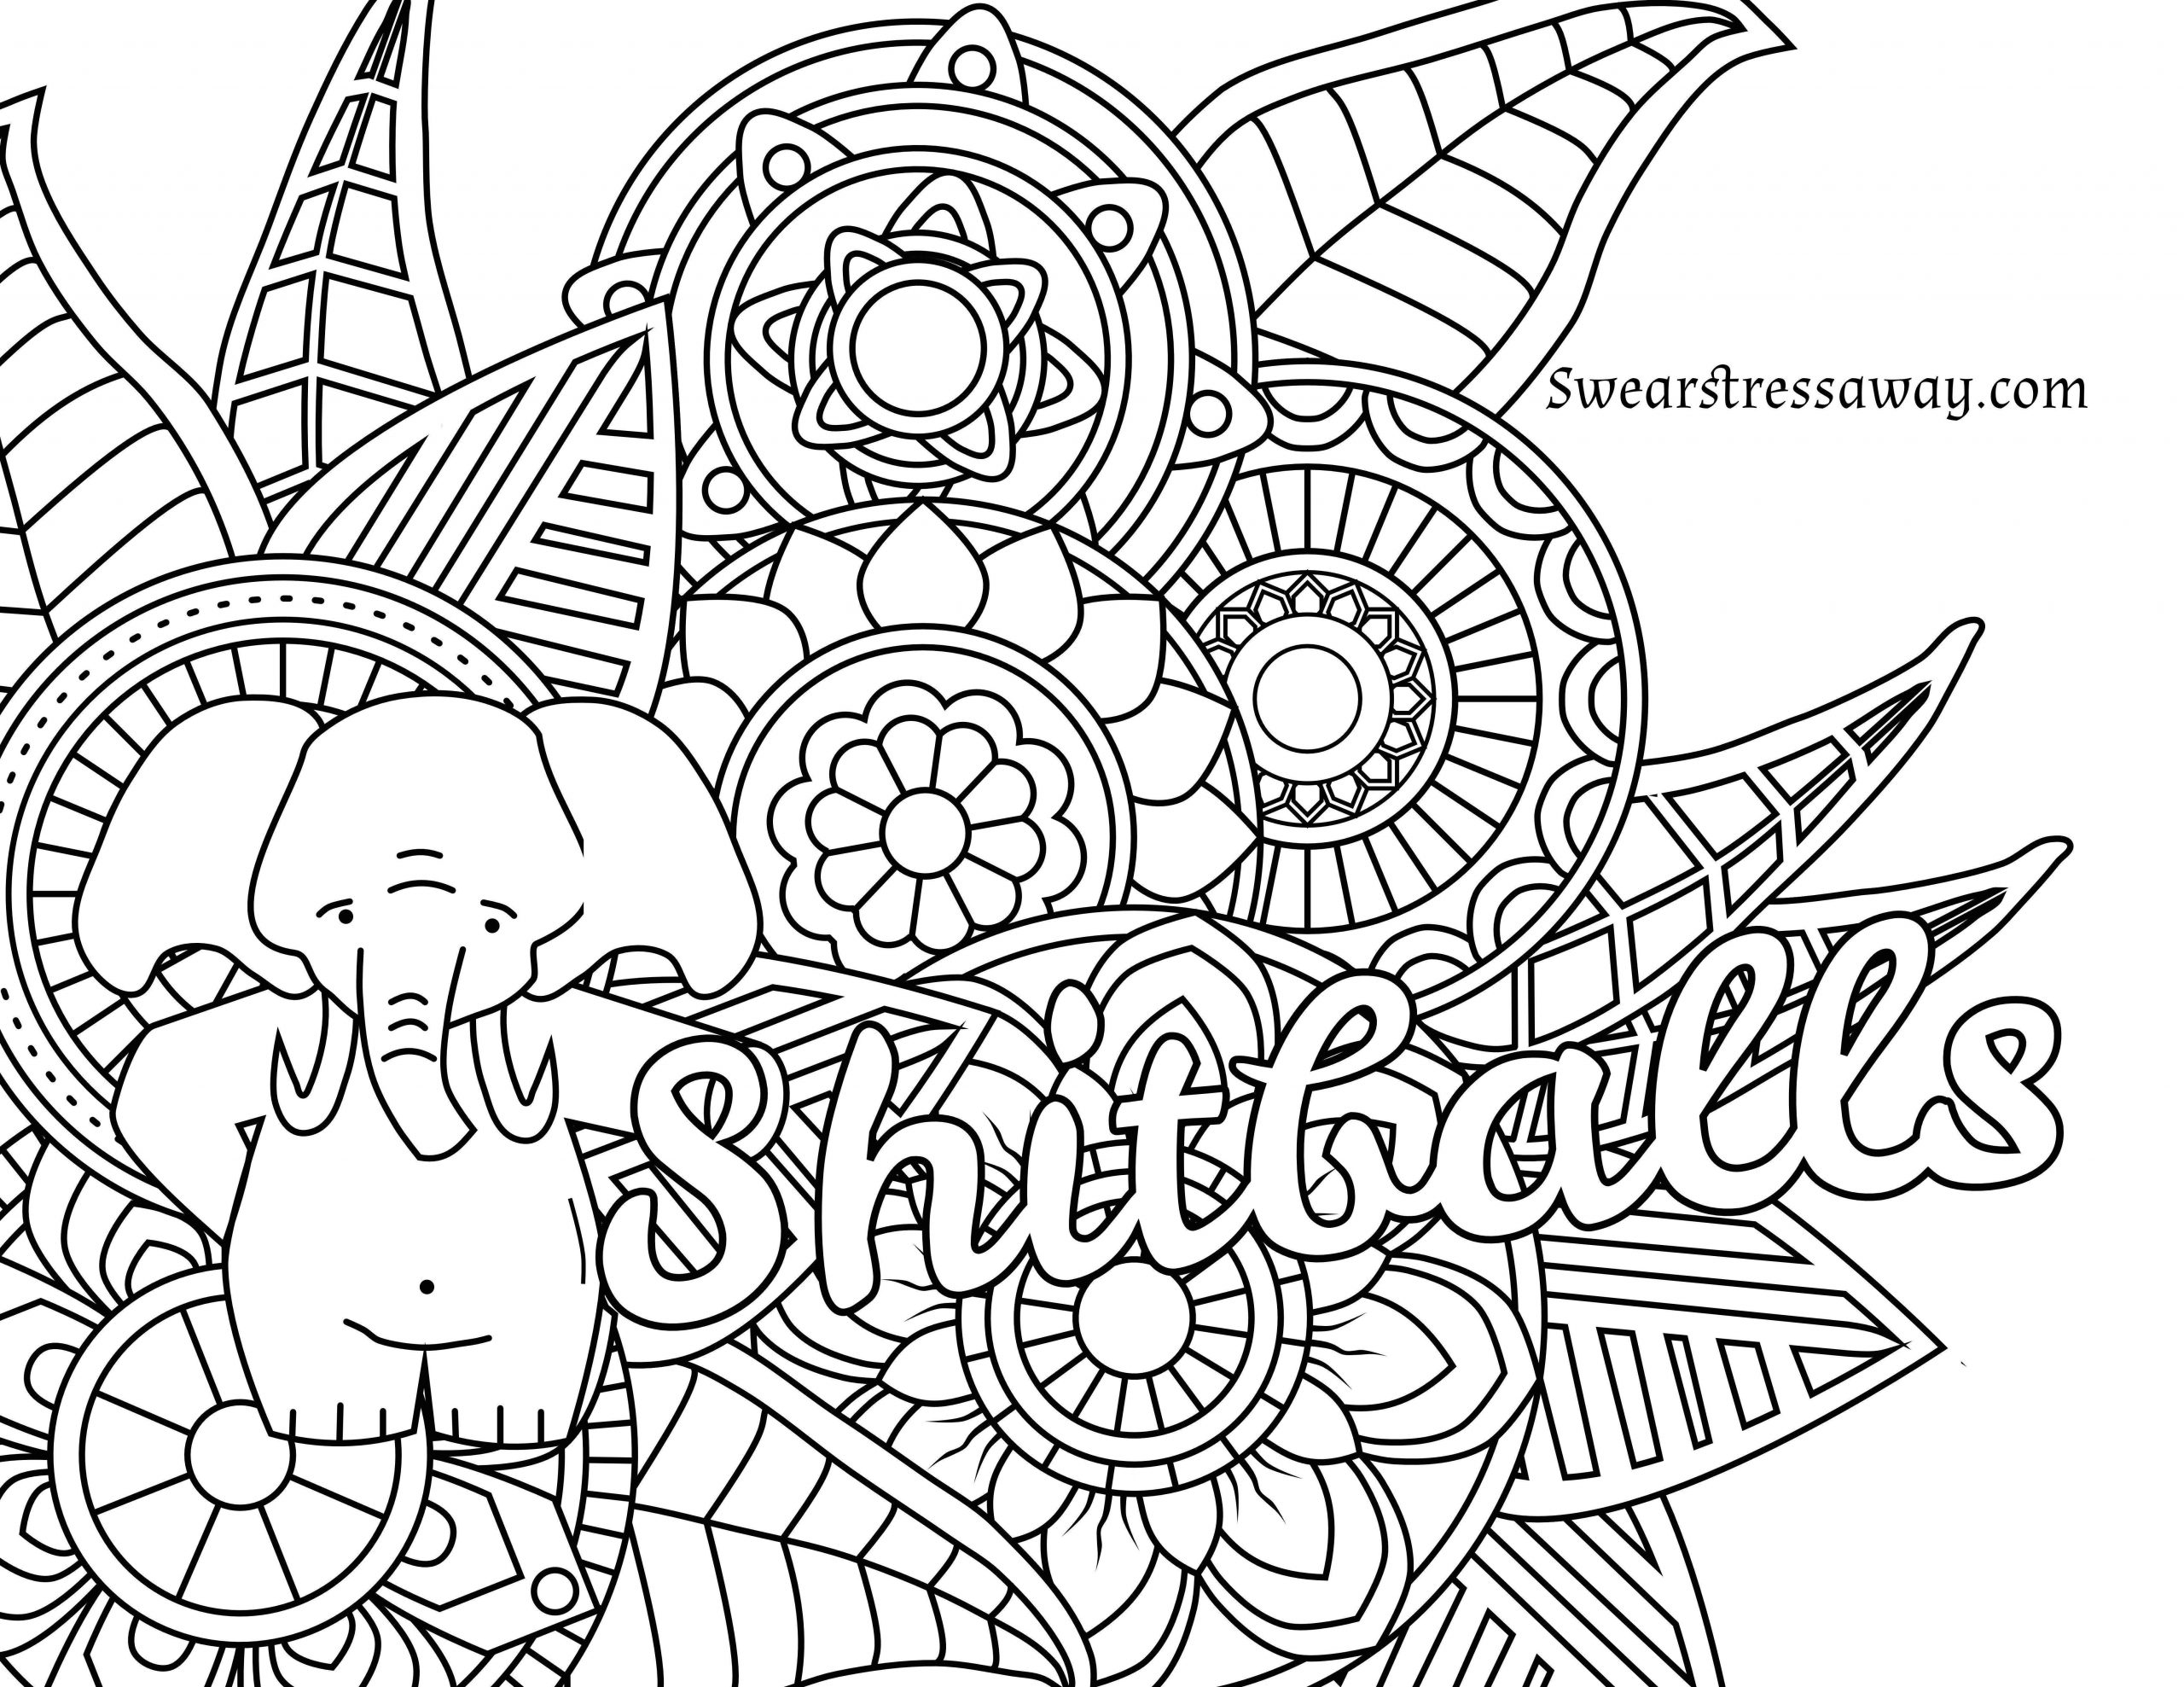 Coloring Pages : Free Printabler Word Coloring Book Pages ...